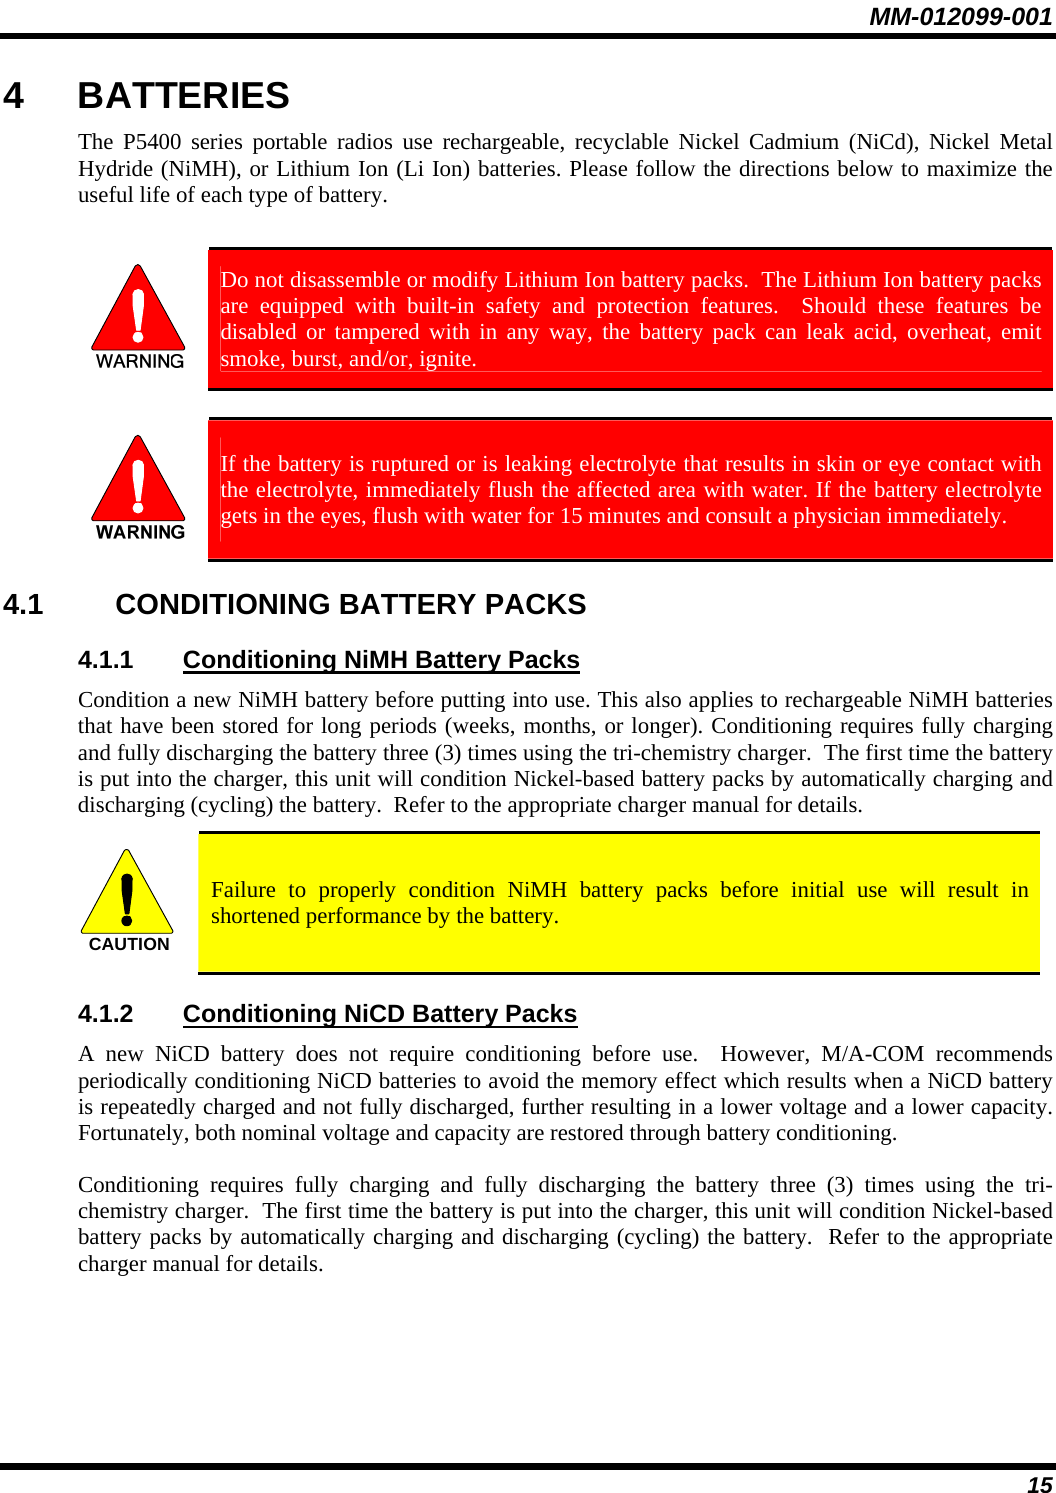 MM-012099-001 15 4 BATTERIES The P5400 series portable radios use rechargeable, recyclable Nickel Cadmium (NiCd), Nickel Metal Hydride (NiMH), or Lithium Ion (Li Ion) batteries. Please follow the directions below to maximize the useful life of each type of battery.   Do not disassemble or modify Lithium Ion battery packs.  The Lithium Ion battery packs are equipped with built-in safety and protection features.  Should these features be disabled or tampered with in any way, the battery pack can leak acid, overheat, emit smoke, burst, and/or, ignite.   If the battery is ruptured or is leaking electrolyte that results in skin or eye contact with the electrolyte, immediately flush the affected area with water. If the battery electrolyte gets in the eyes, flush with water for 15 minutes and consult a physician immediately. 4.1 CONDITIONING BATTERY PACKS 4.1.1  Conditioning NiMH Battery Packs Condition a new NiMH battery before putting into use. This also applies to rechargeable NiMH batteries that have been stored for long periods (weeks, months, or longer). Conditioning requires fully charging and fully discharging the battery three (3) times using the tri-chemistry charger.  The first time the battery is put into the charger, this unit will condition Nickel-based battery packs by automatically charging and discharging (cycling) the battery.  Refer to the appropriate charger manual for details. CAUTION  Failure to properly condition NiMH battery packs before initial use will result in shortened performance by the battery. 4.1.2  Conditioning NiCD Battery Packs A new NiCD battery does not require conditioning before use.  However, M/A-COM recommends periodically conditioning NiCD batteries to avoid the memory effect which results when a NiCD battery is repeatedly charged and not fully discharged, further resulting in a lower voltage and a lower capacity. Fortunately, both nominal voltage and capacity are restored through battery conditioning.   Conditioning requires fully charging and fully discharging the battery three (3) times using the tri-chemistry charger.  The first time the battery is put into the charger, this unit will condition Nickel-based battery packs by automatically charging and discharging (cycling) the battery.  Refer to the appropriate charger manual for details.  